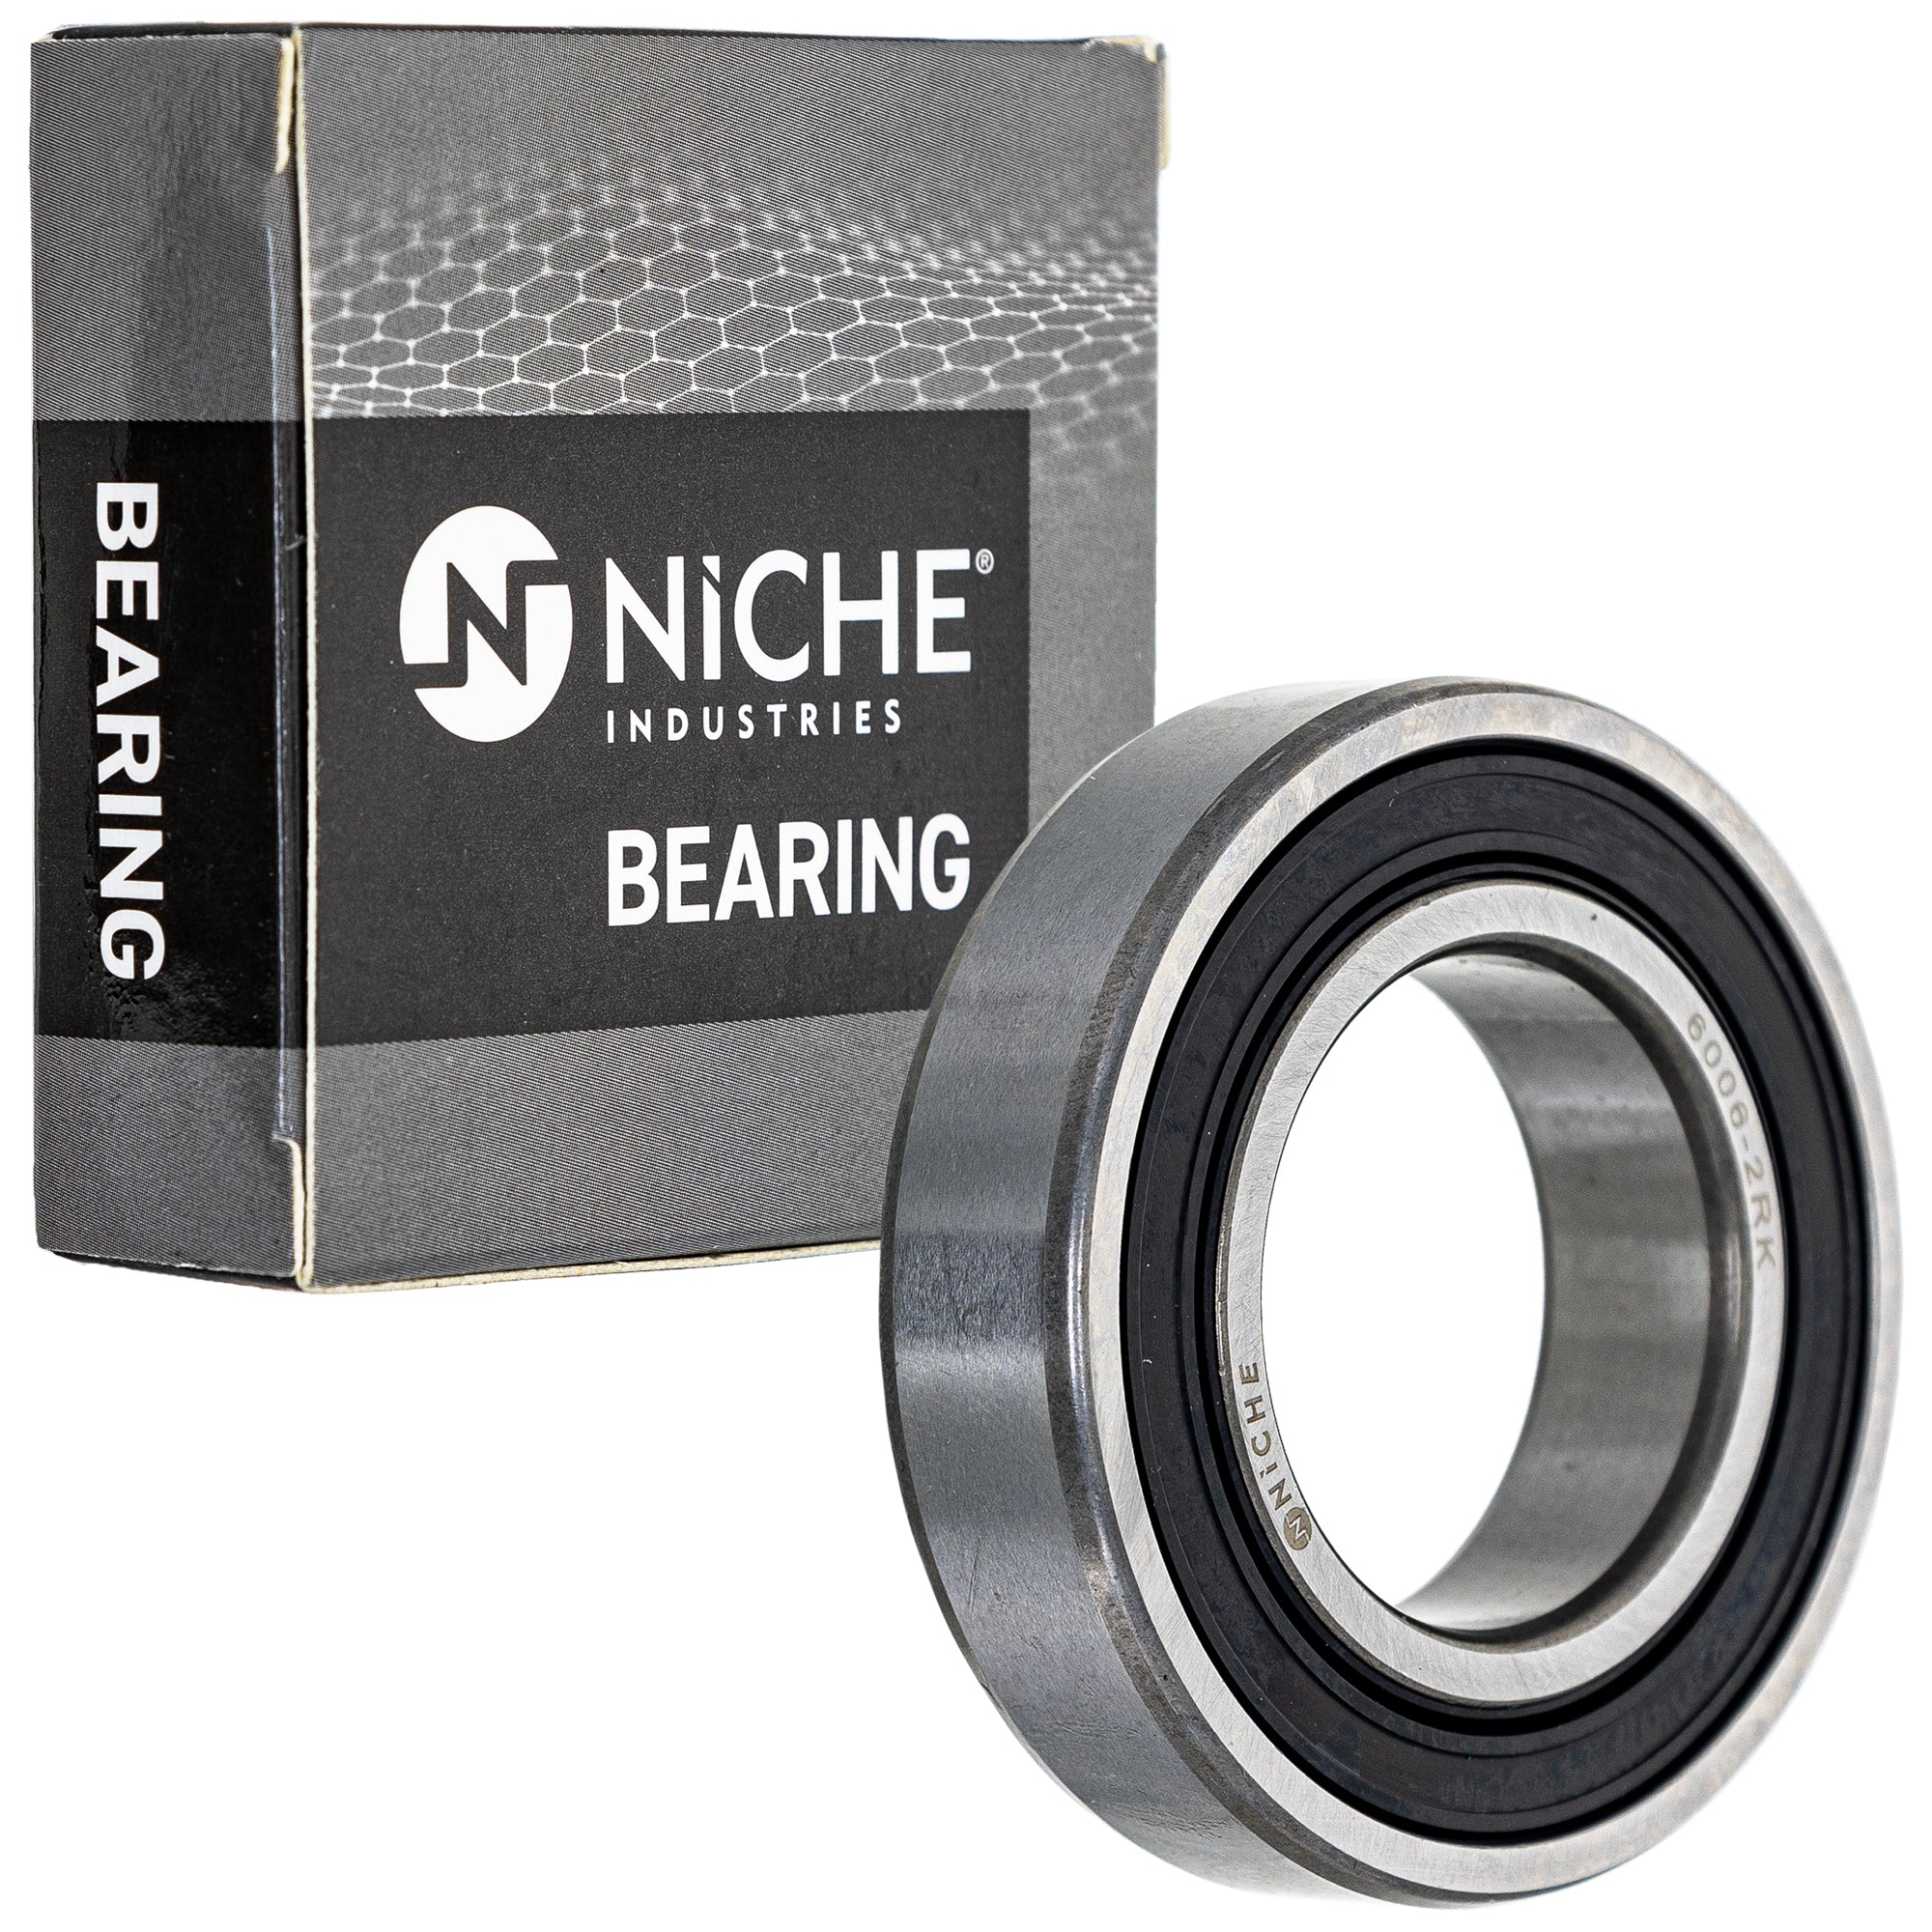 NICHE 519-CBB2218R Bearing for zOTHER Arctic Cat Textron XR200R